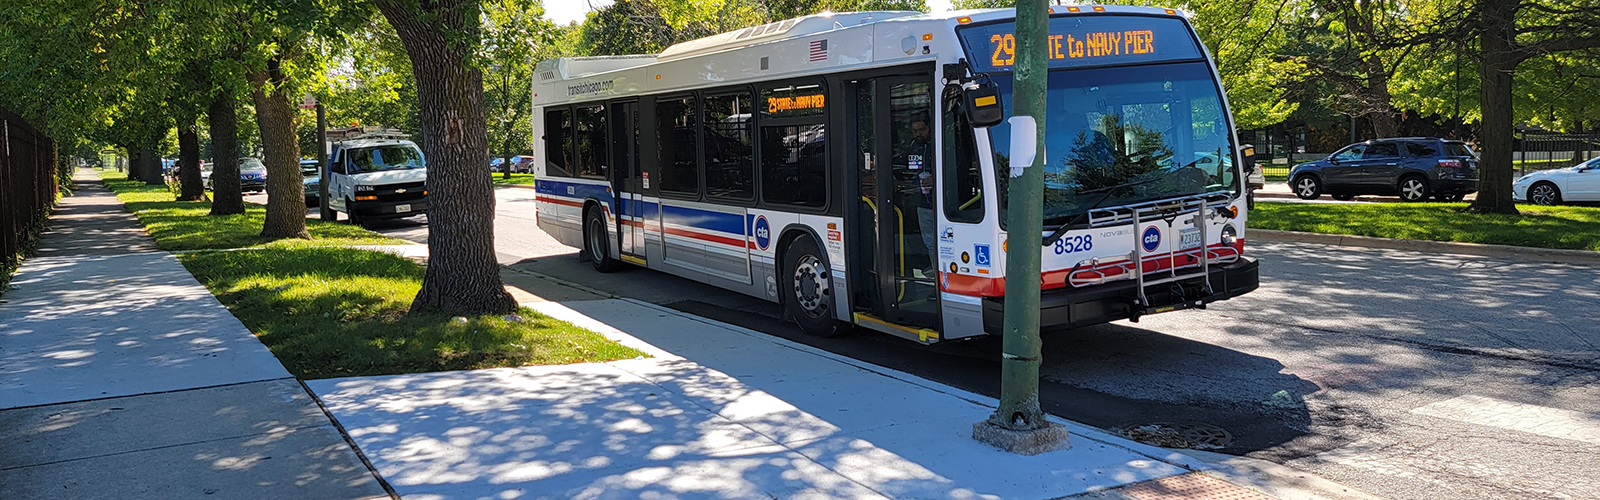 Bus stopping at signed stop with a fresh concrete sidewalk along parkway for boarding